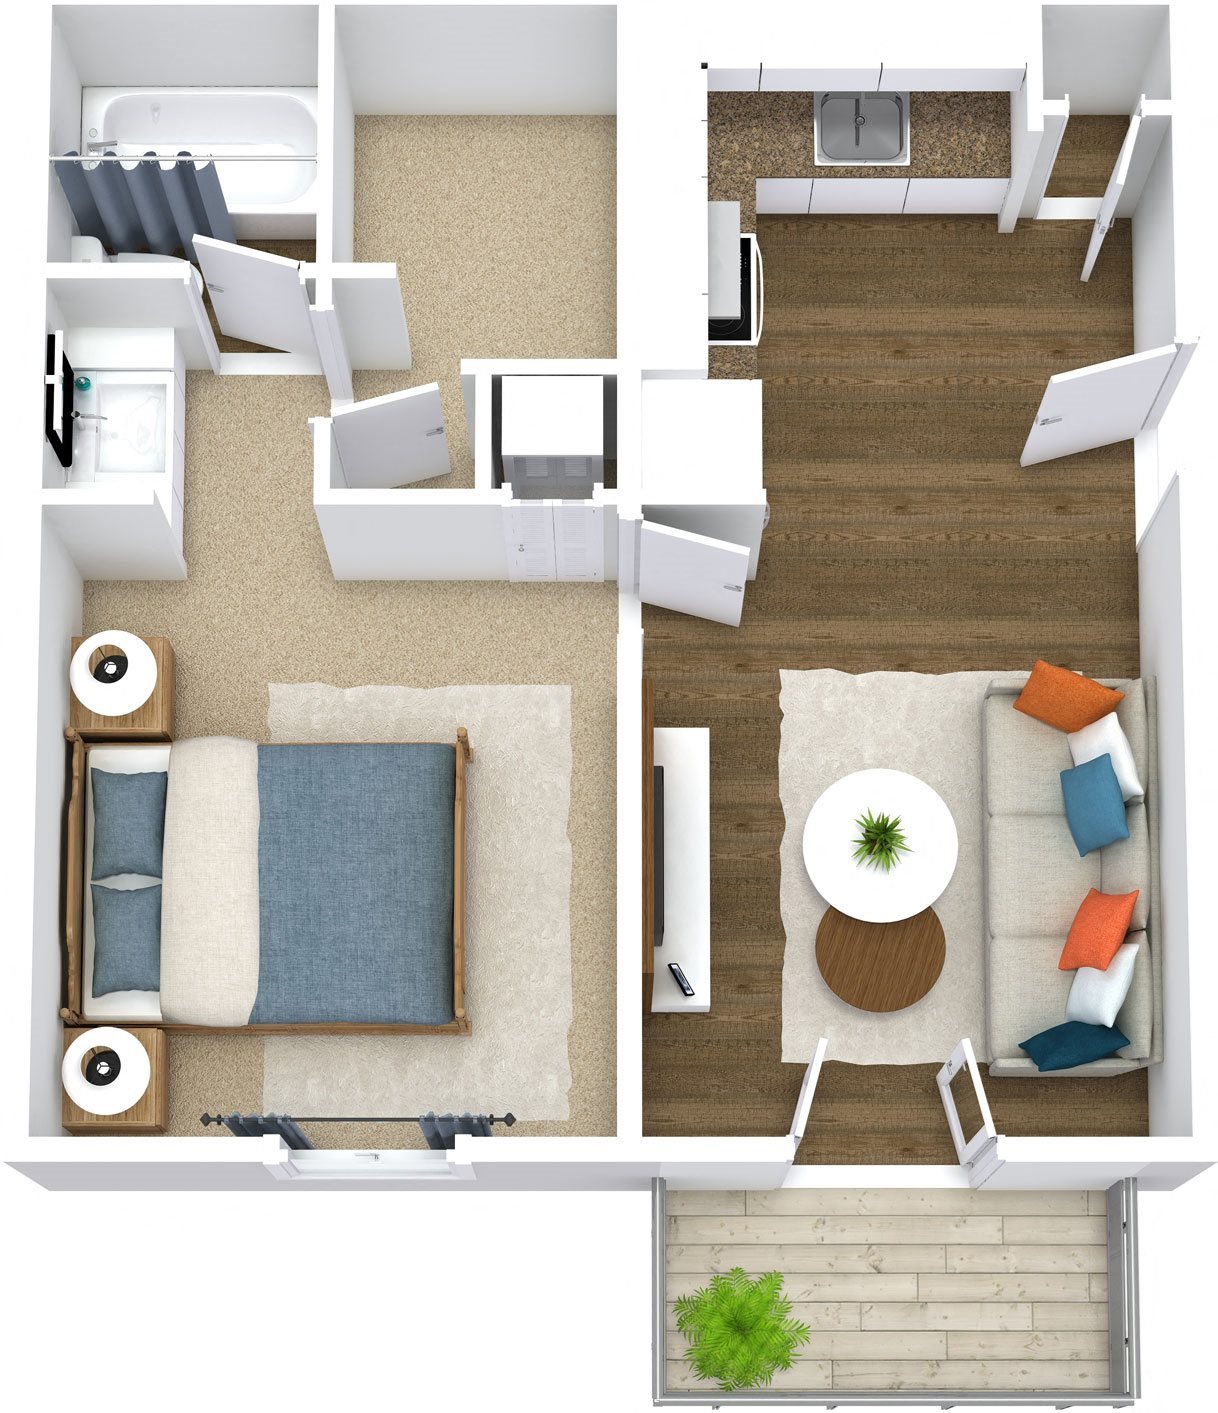 Floor Plans Of The Trails Apartments In Nashville Tn